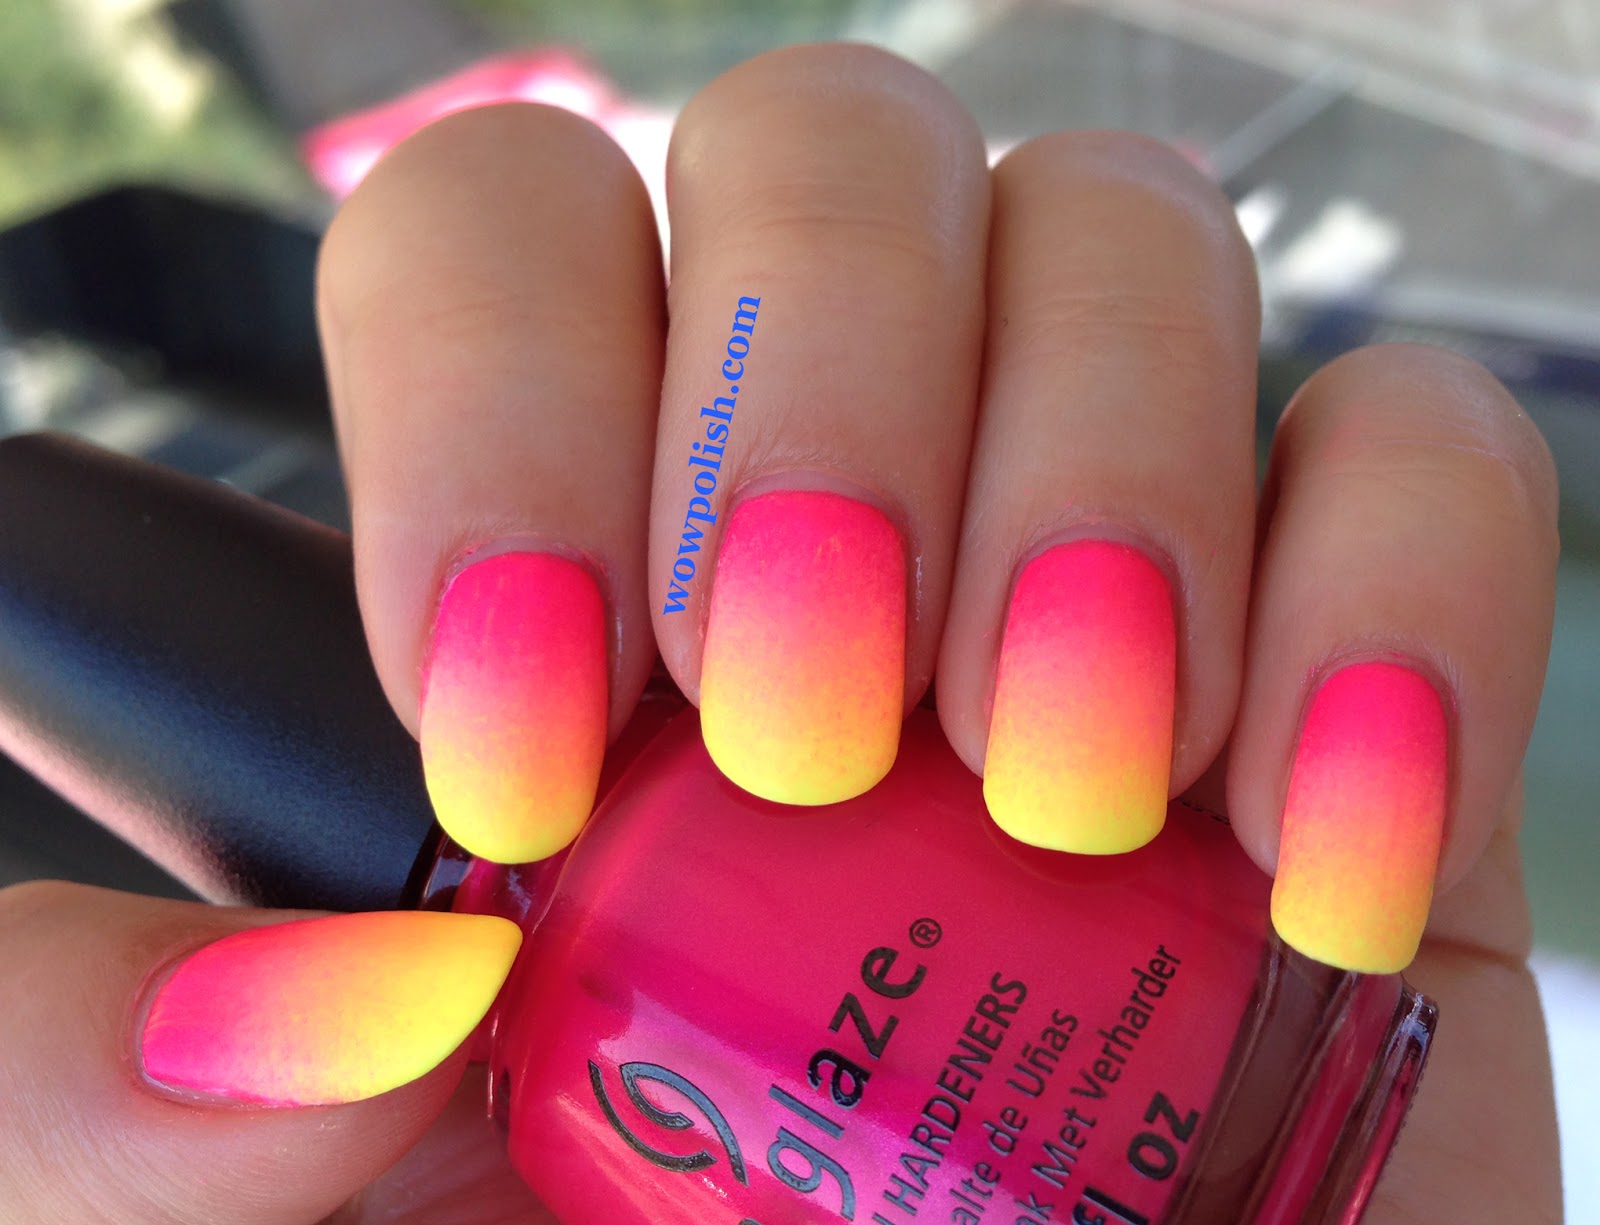 3. Neon French Tip Nail Designs - wide 9